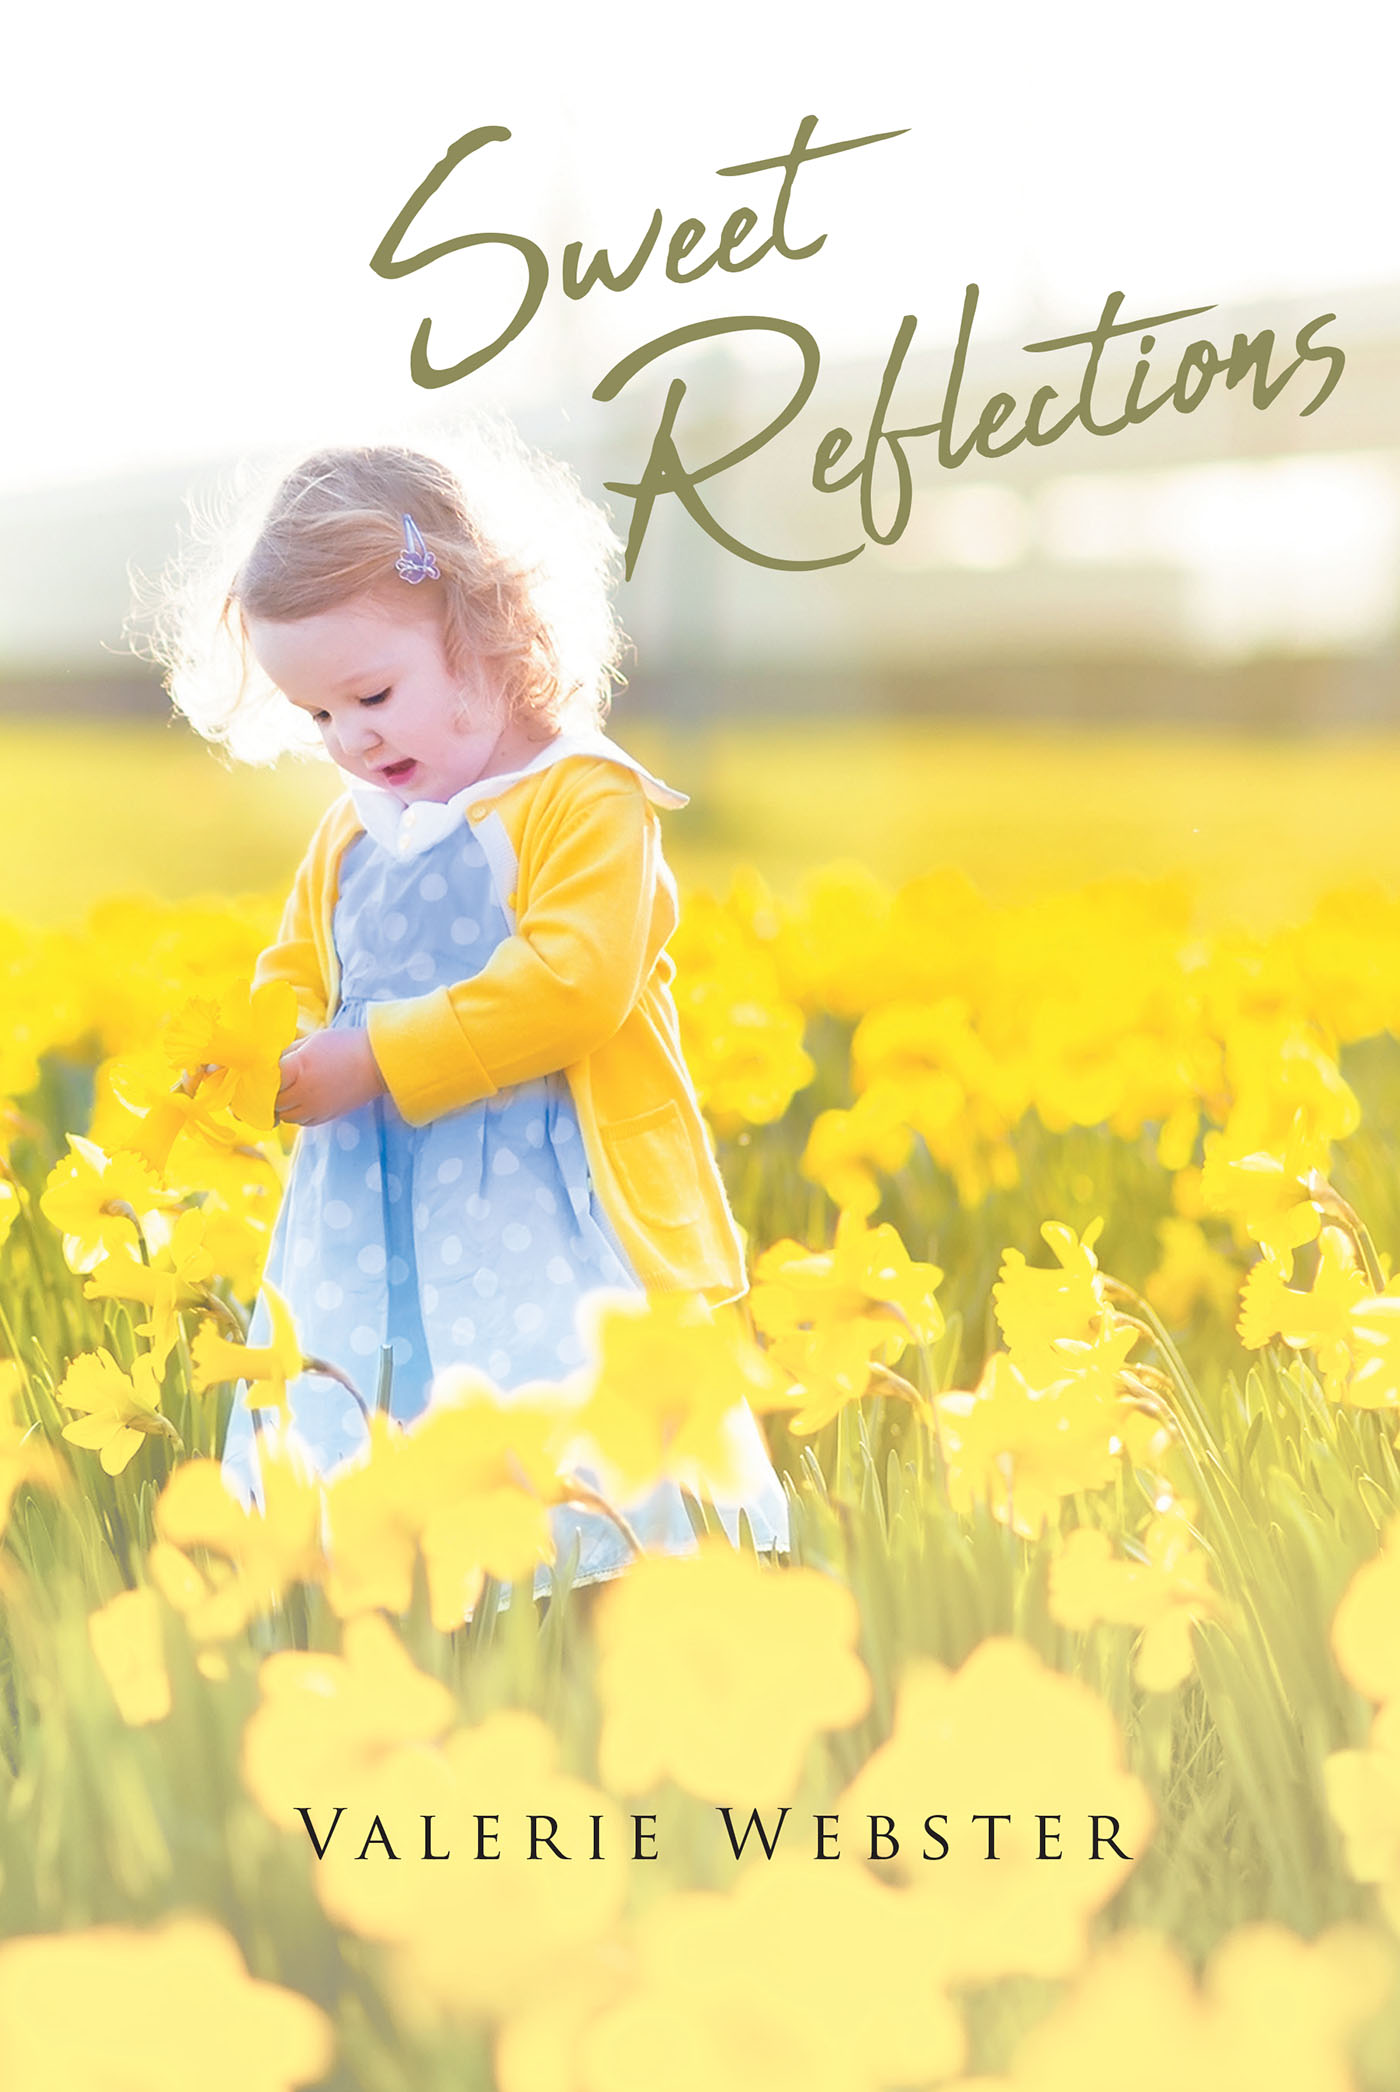 Author Valerie Webster’s New Book, "Sweet Reflections," is a Collection of Poetry That Highlights the Sweeter Side of Life from the Author’s Perspective